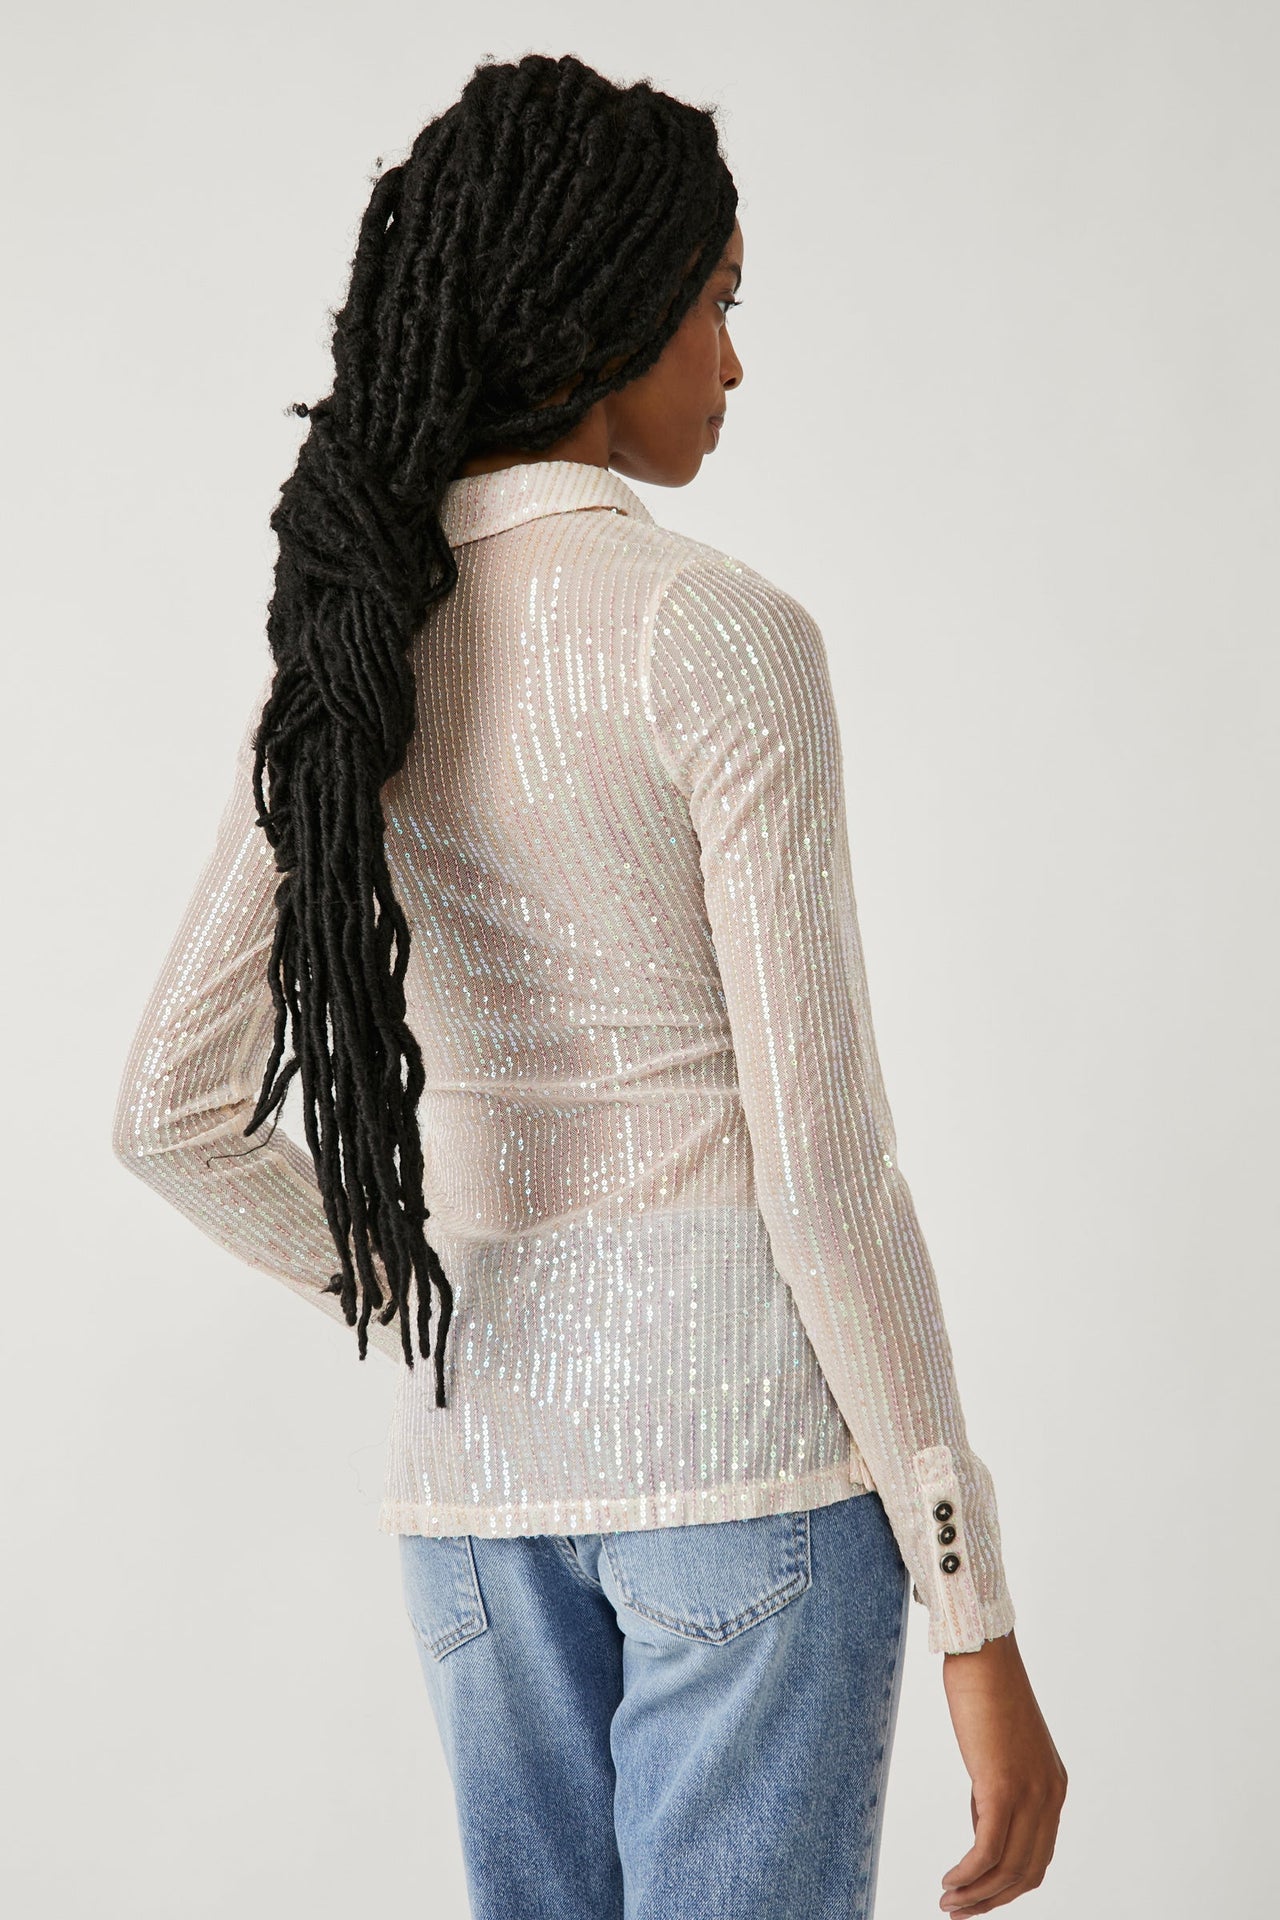 Sequin Shirtee Champagne Dreams, Tops Blouses by Free People | LIT Boutique